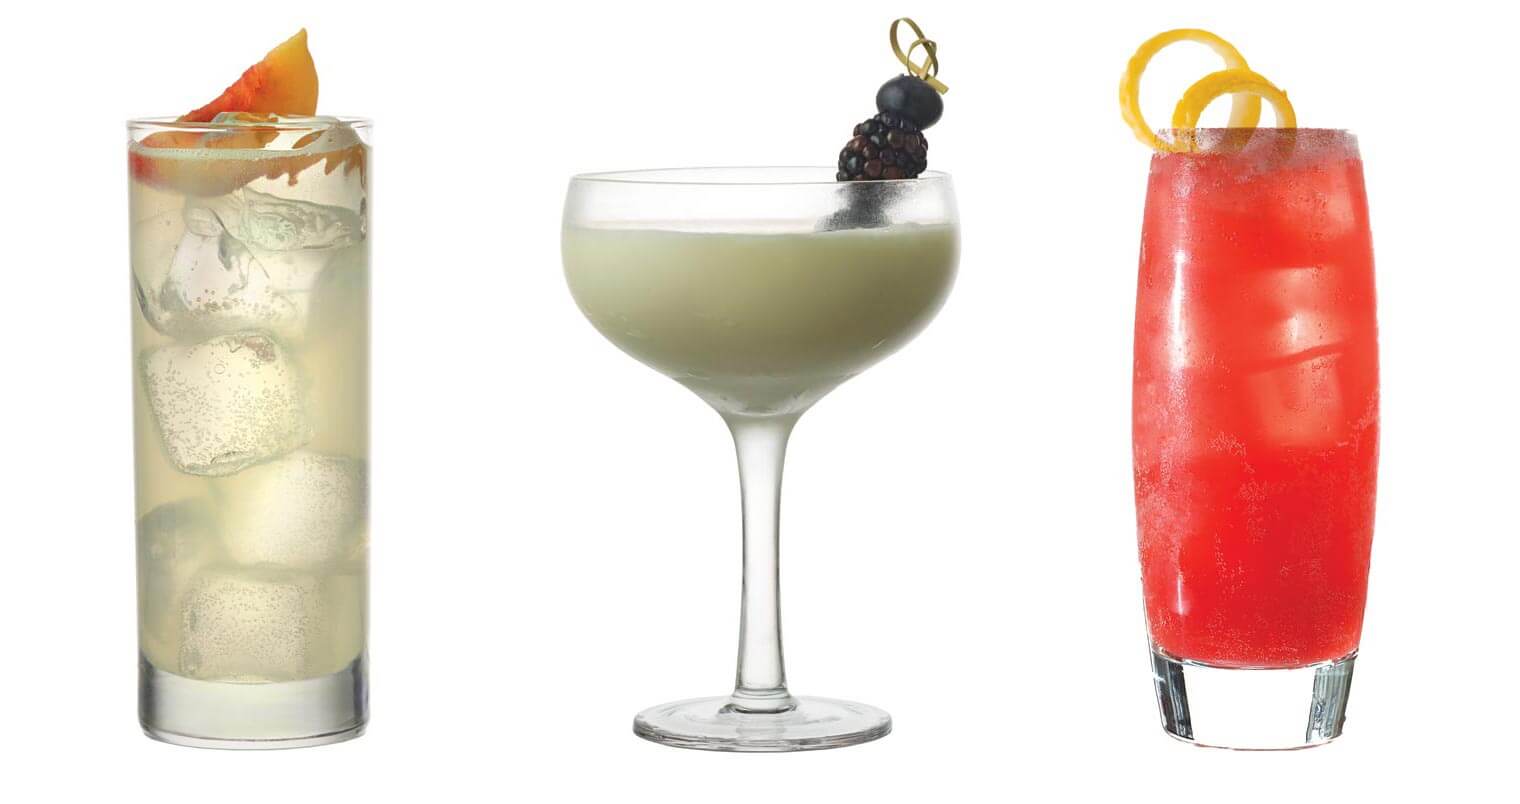 4 Easy to Mix Belvedere Vodka July 4th Cocktails